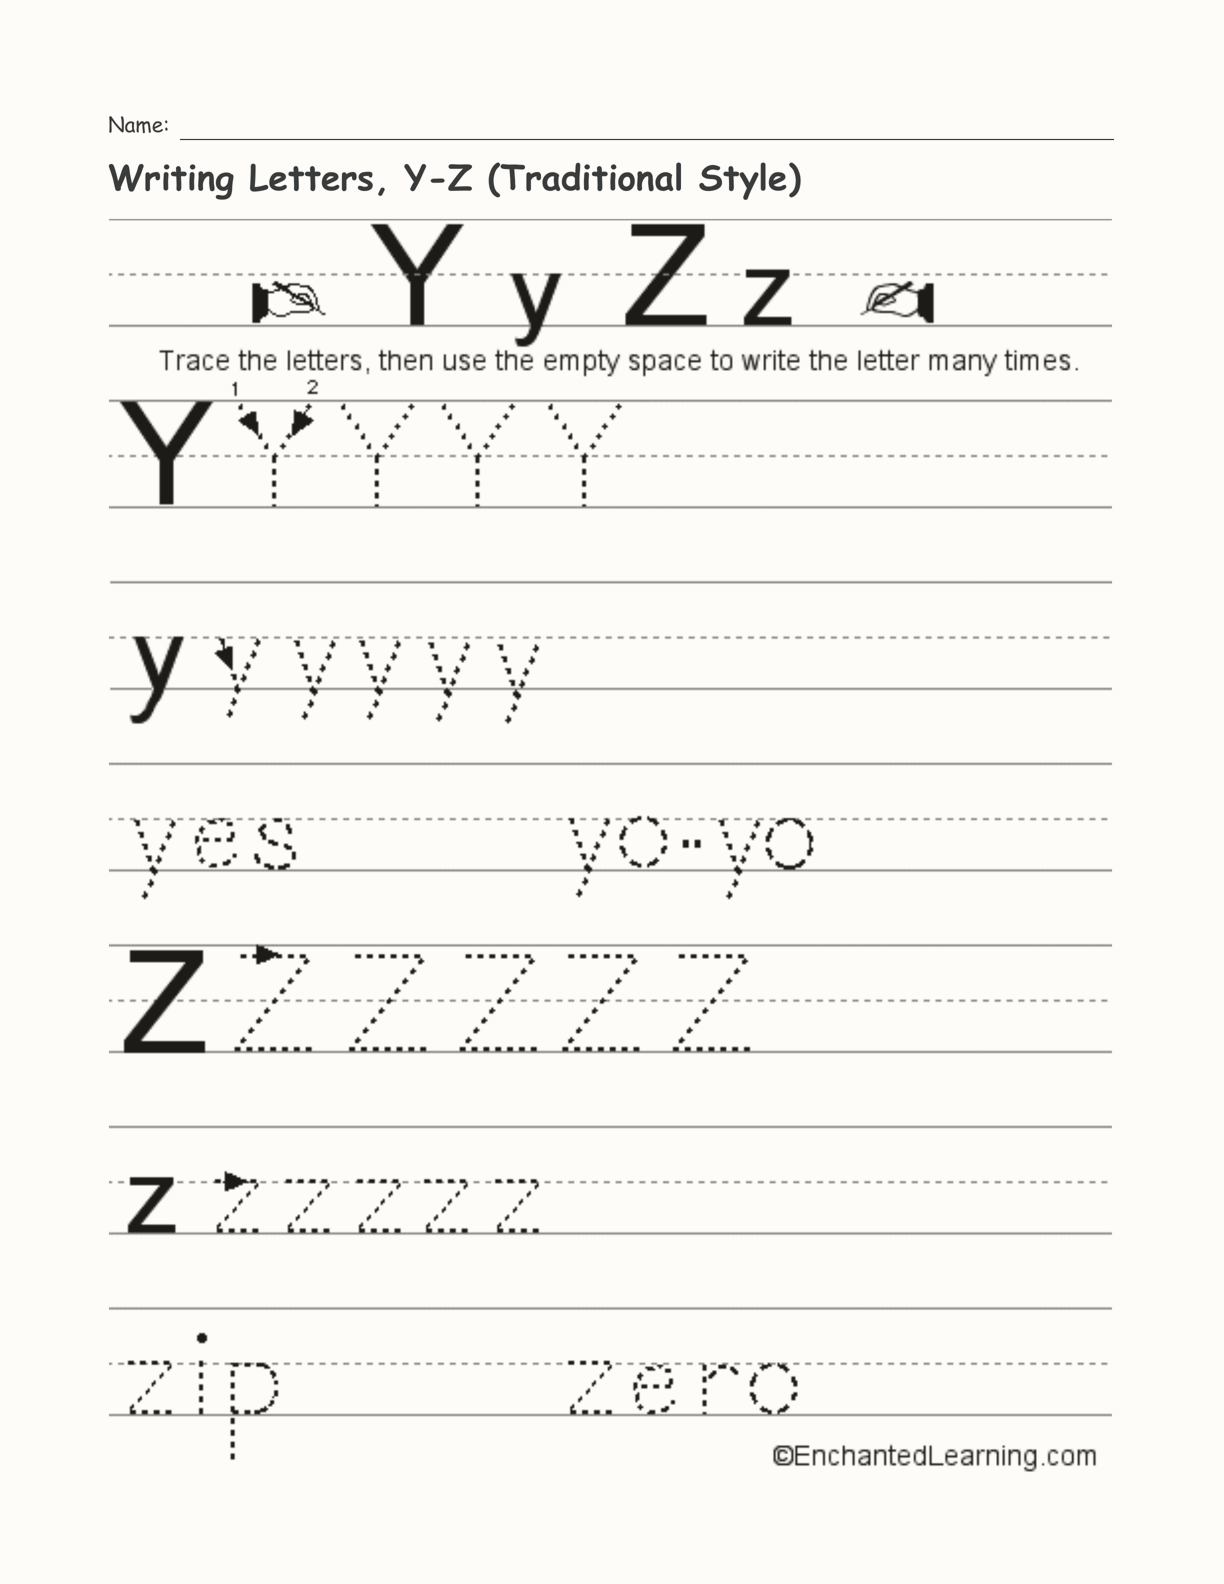 Writing Letters, Y-Z (Traditional Style) interactive worksheet page 1